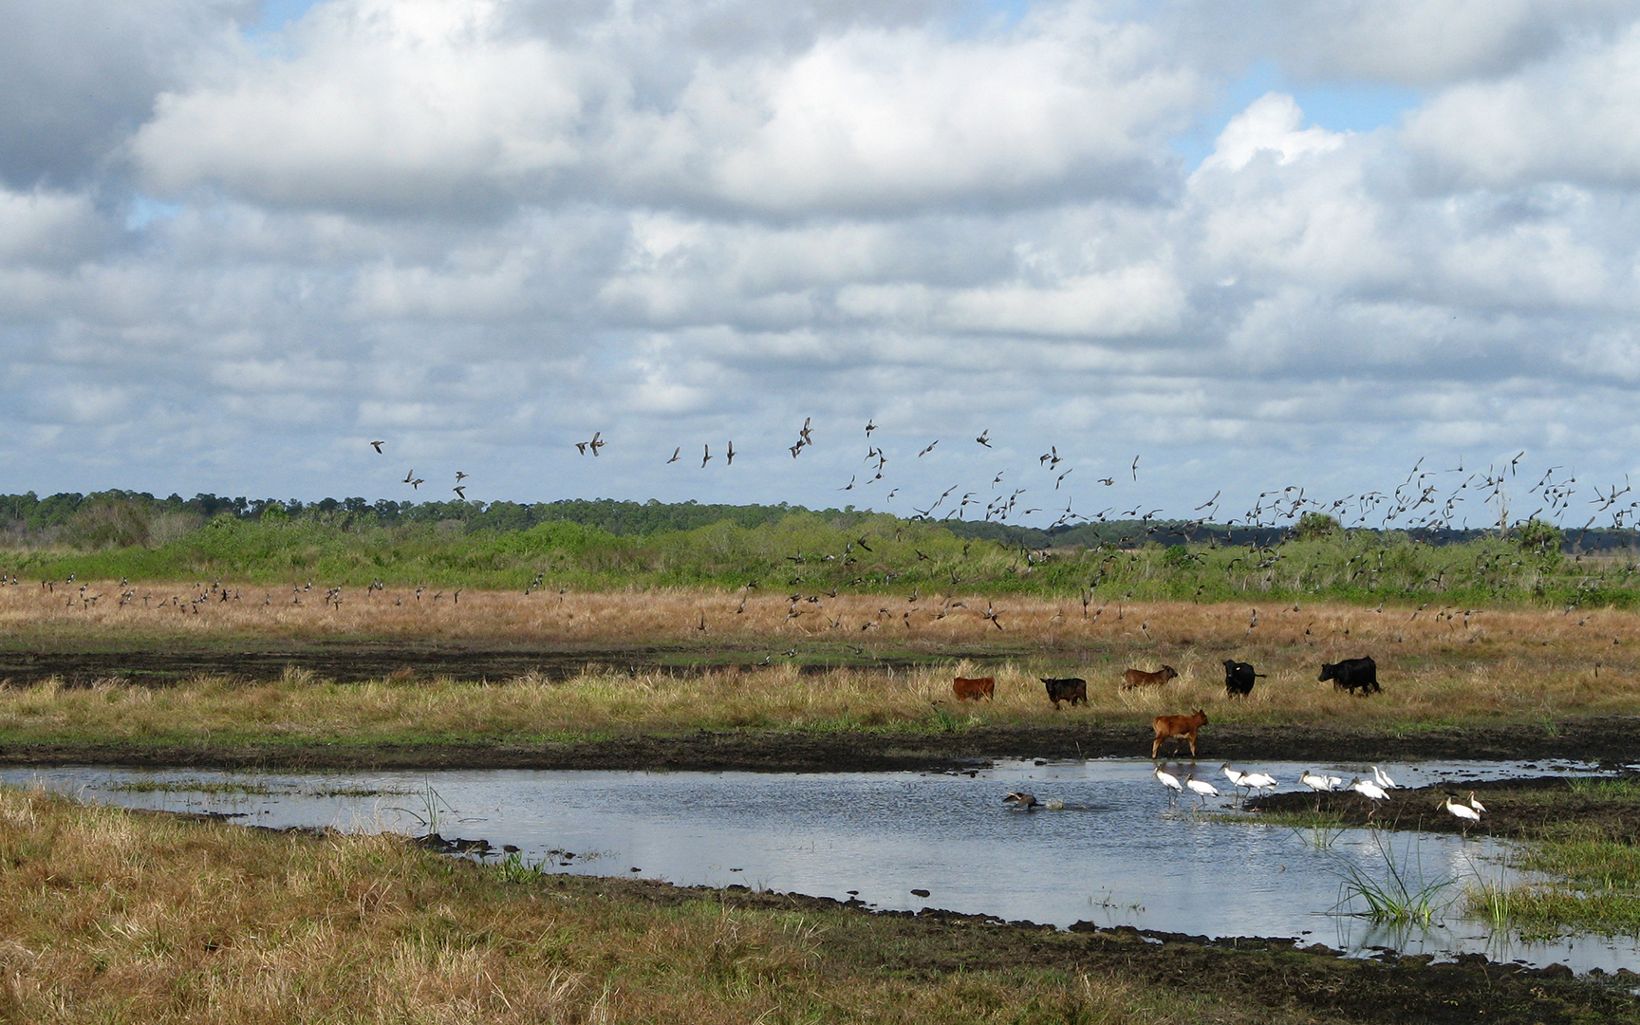 A flock of birds flies over a wetland area with cows and wading birds standing along the edge of a river at Rafter T Ranch.